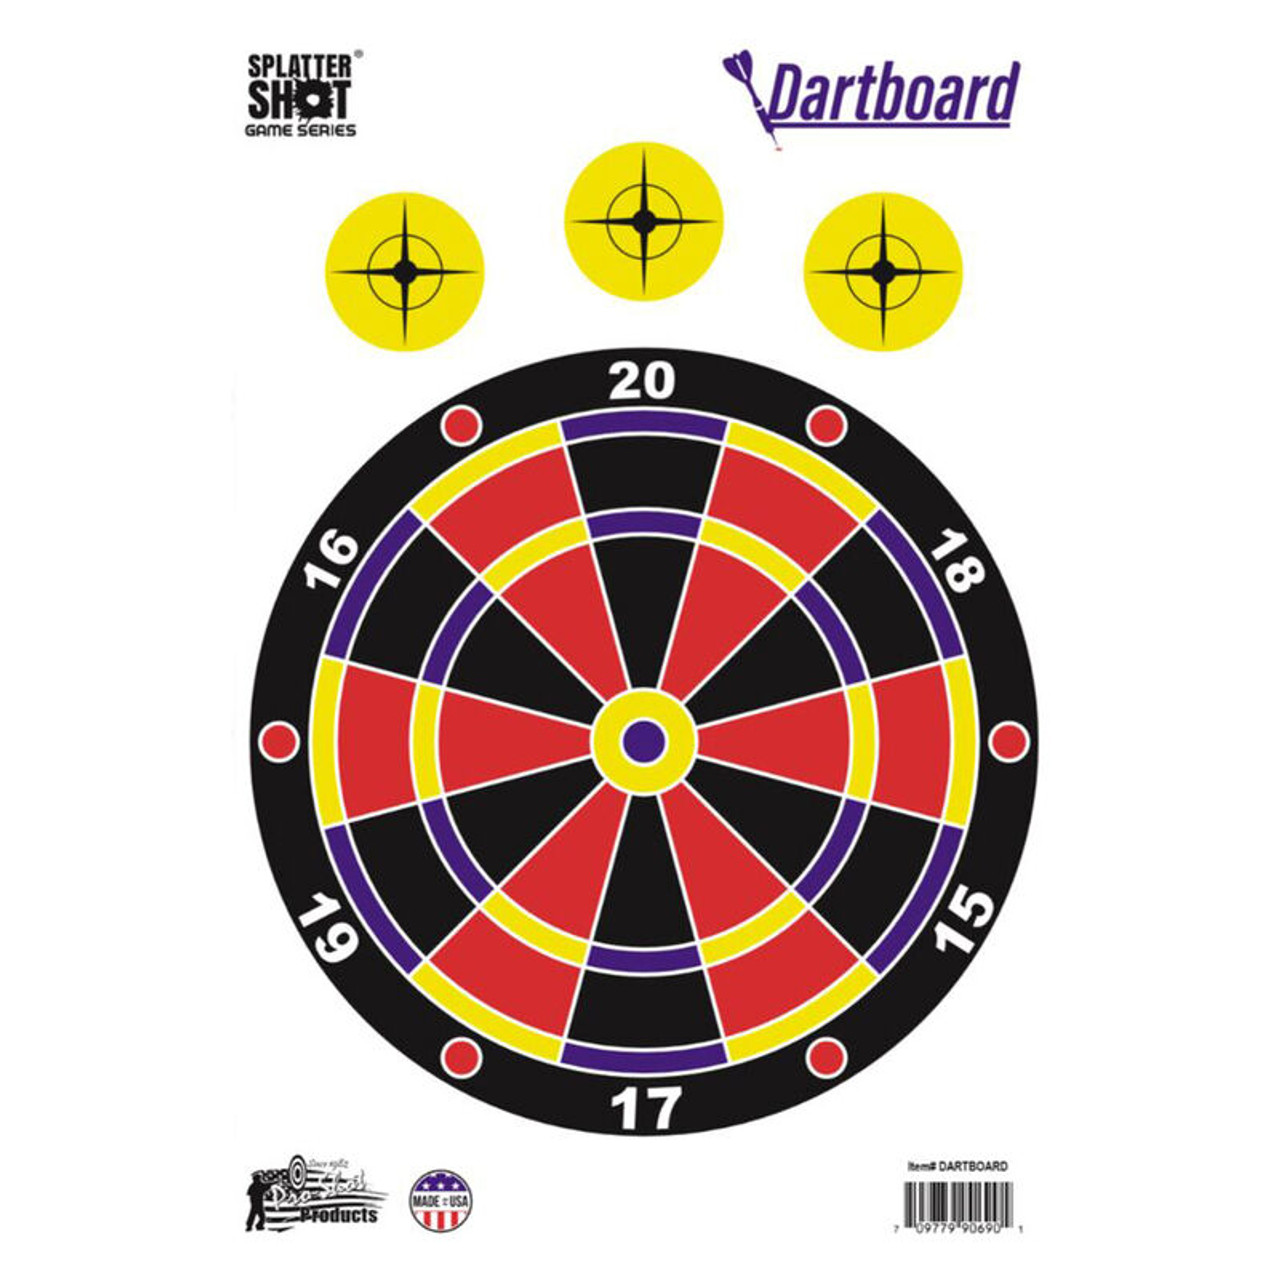 Pro-Shot splatter shot targets reveal where your shot hits in a bright reflective color allowing you to quickly see your shots from down range. The adhesive backing allows the target to adhere to smooth, flat surfaces.

Features and Specifications:
Size: 12" x 18"
Bullet Holes Revealed with Bright White Rings
6 Target Areas for Extended Use
Heavy Tag Paper
Package of 8 Targets
Made in the USA
